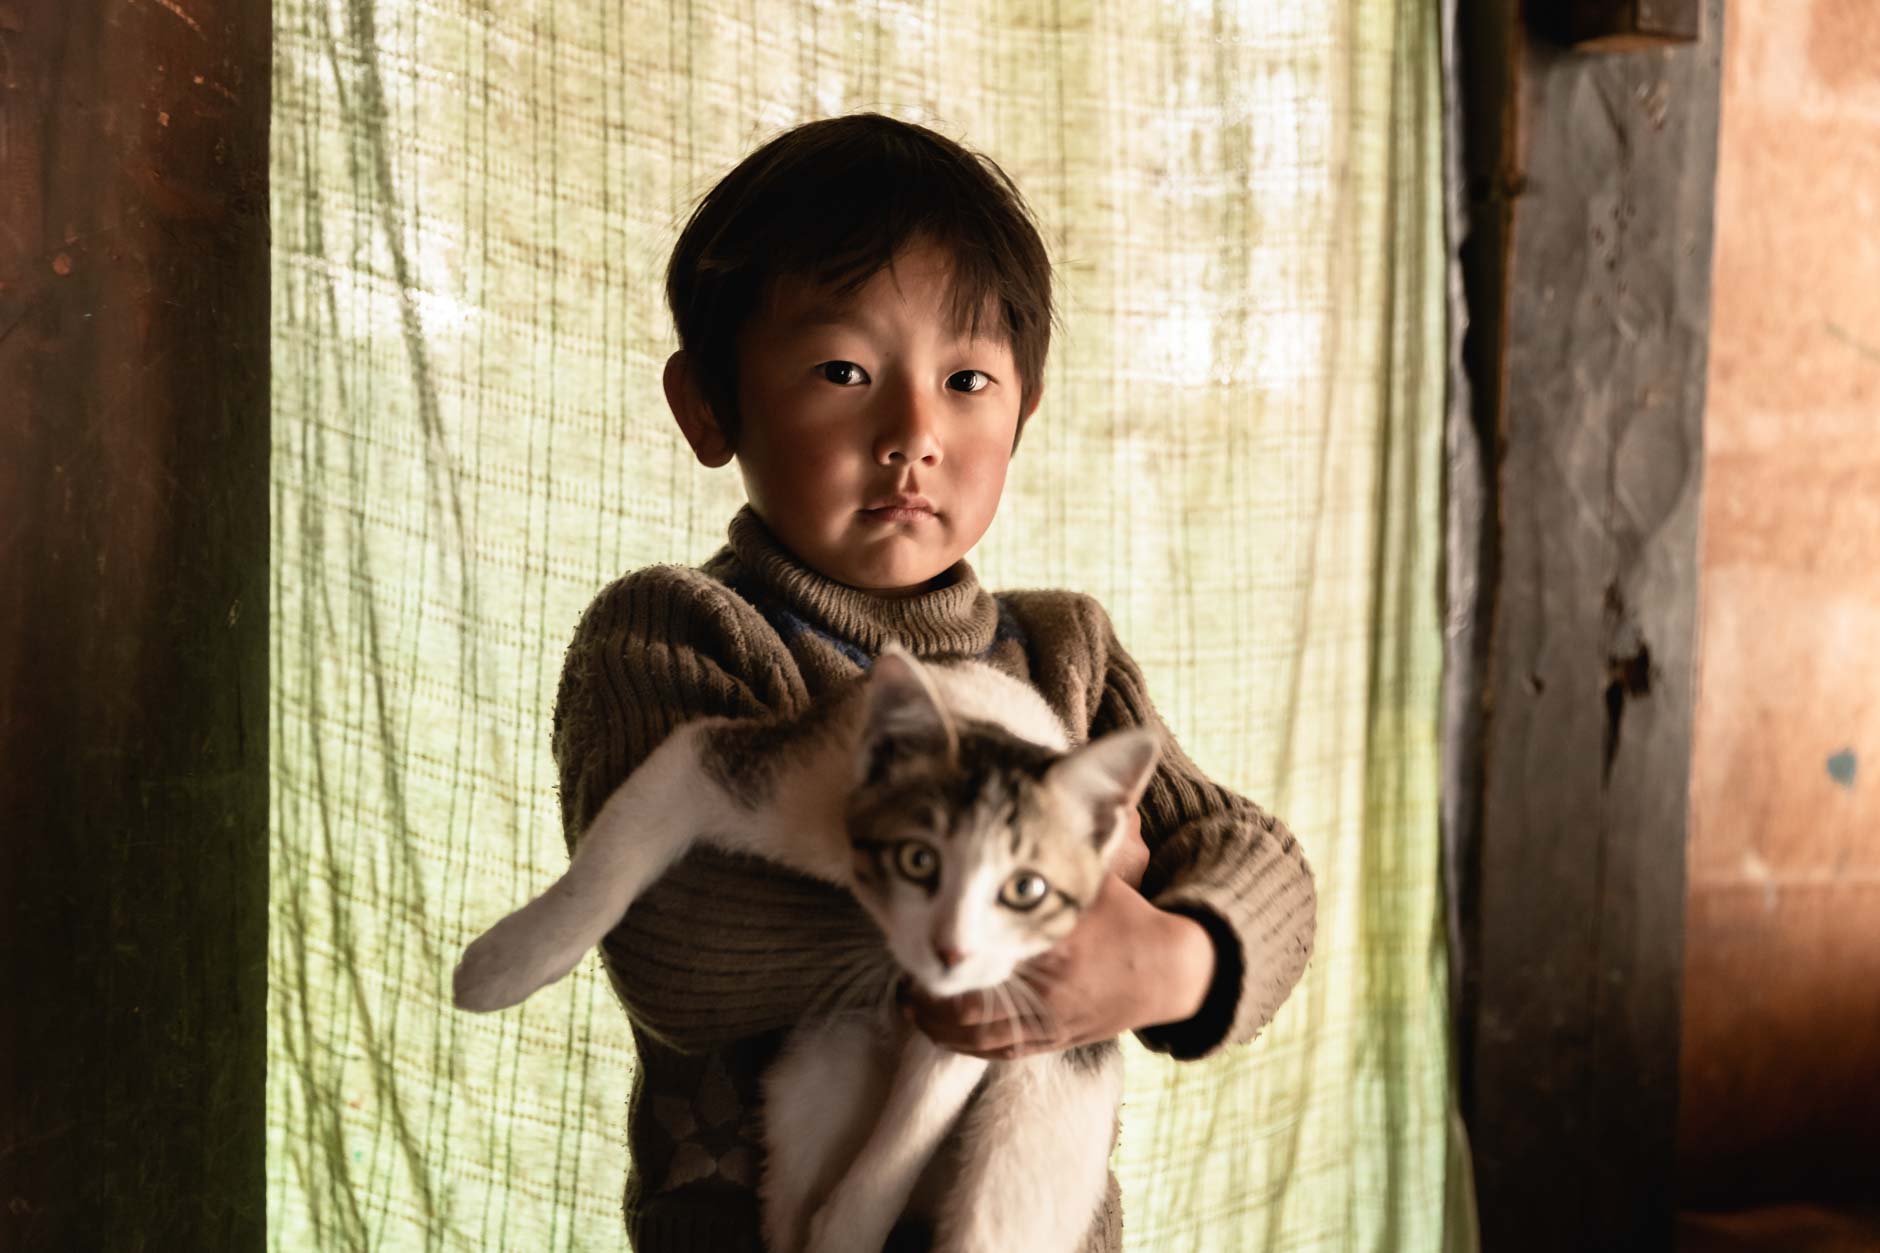 Portrait photography of a young Bhutanese boy holding a cat